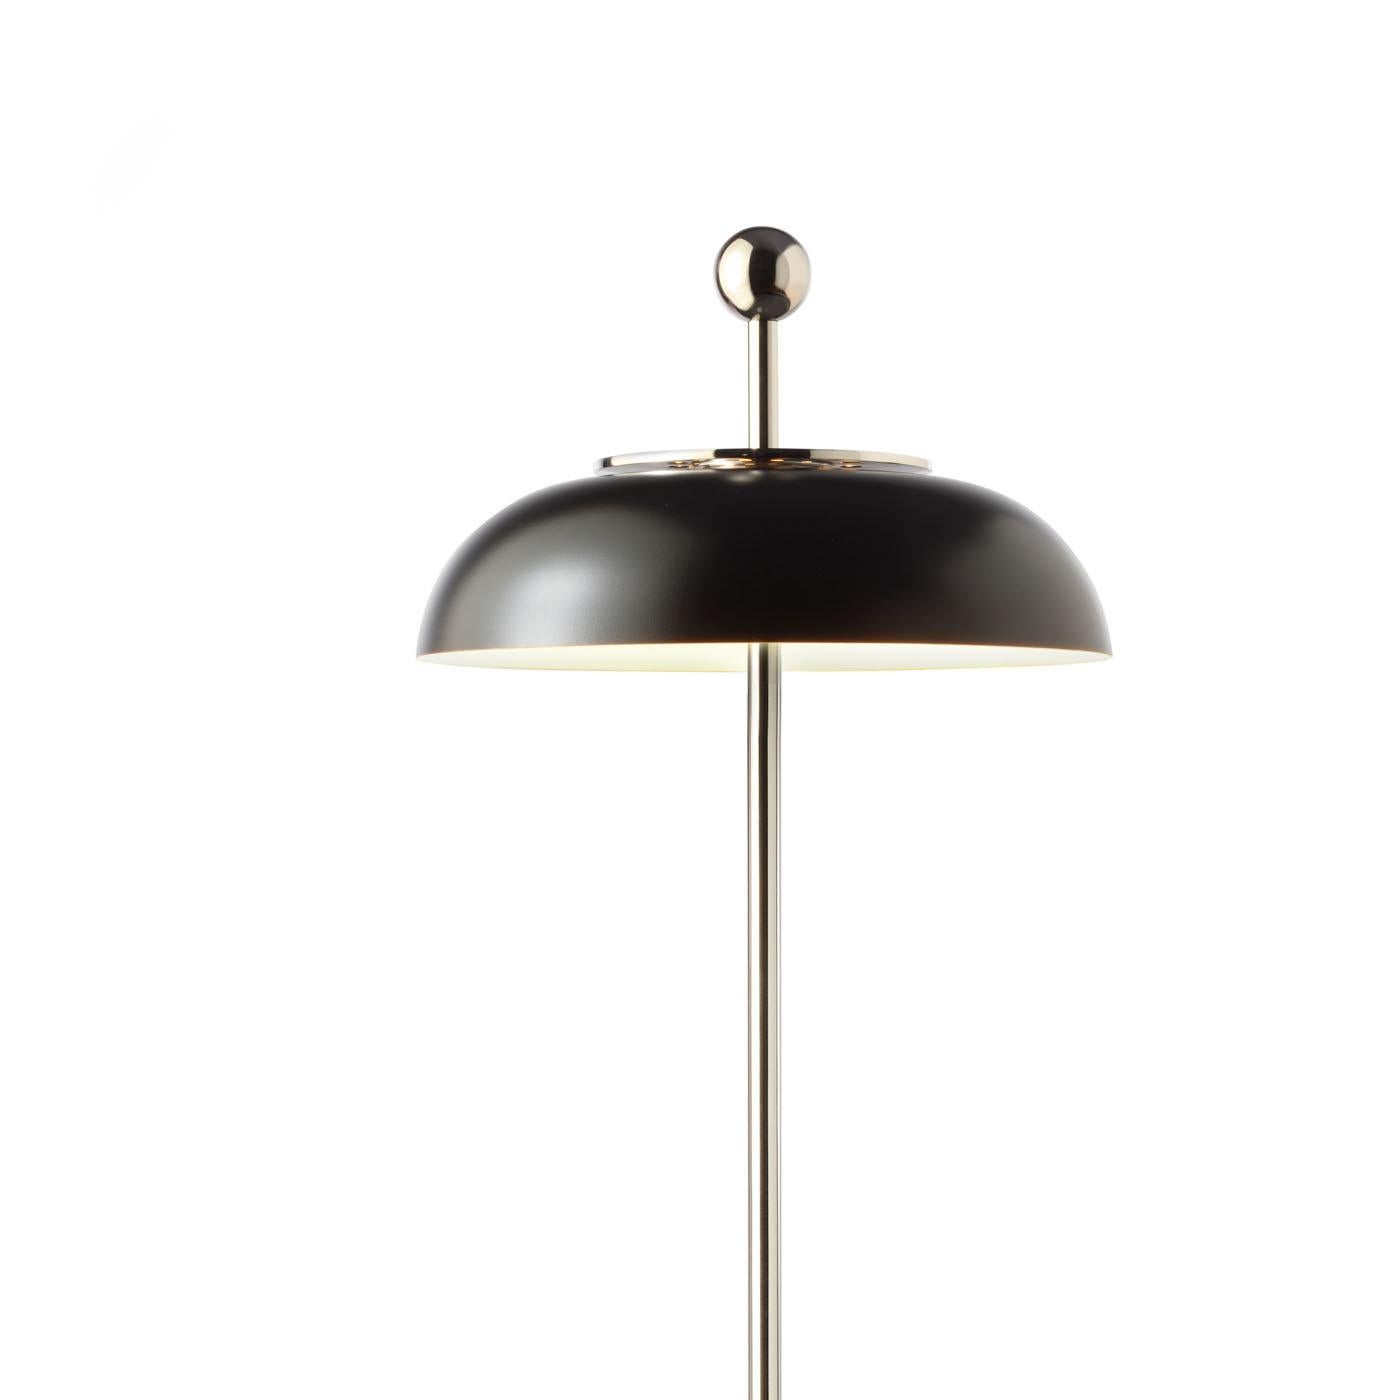 This charming floor lamp is a modern reinterpretation of the classic floor lamp with clean lines, geometric shapes, and cool colors. The use of metal throughout with a nickel finish is also a contemporary choice, while the semi-spherical shade is